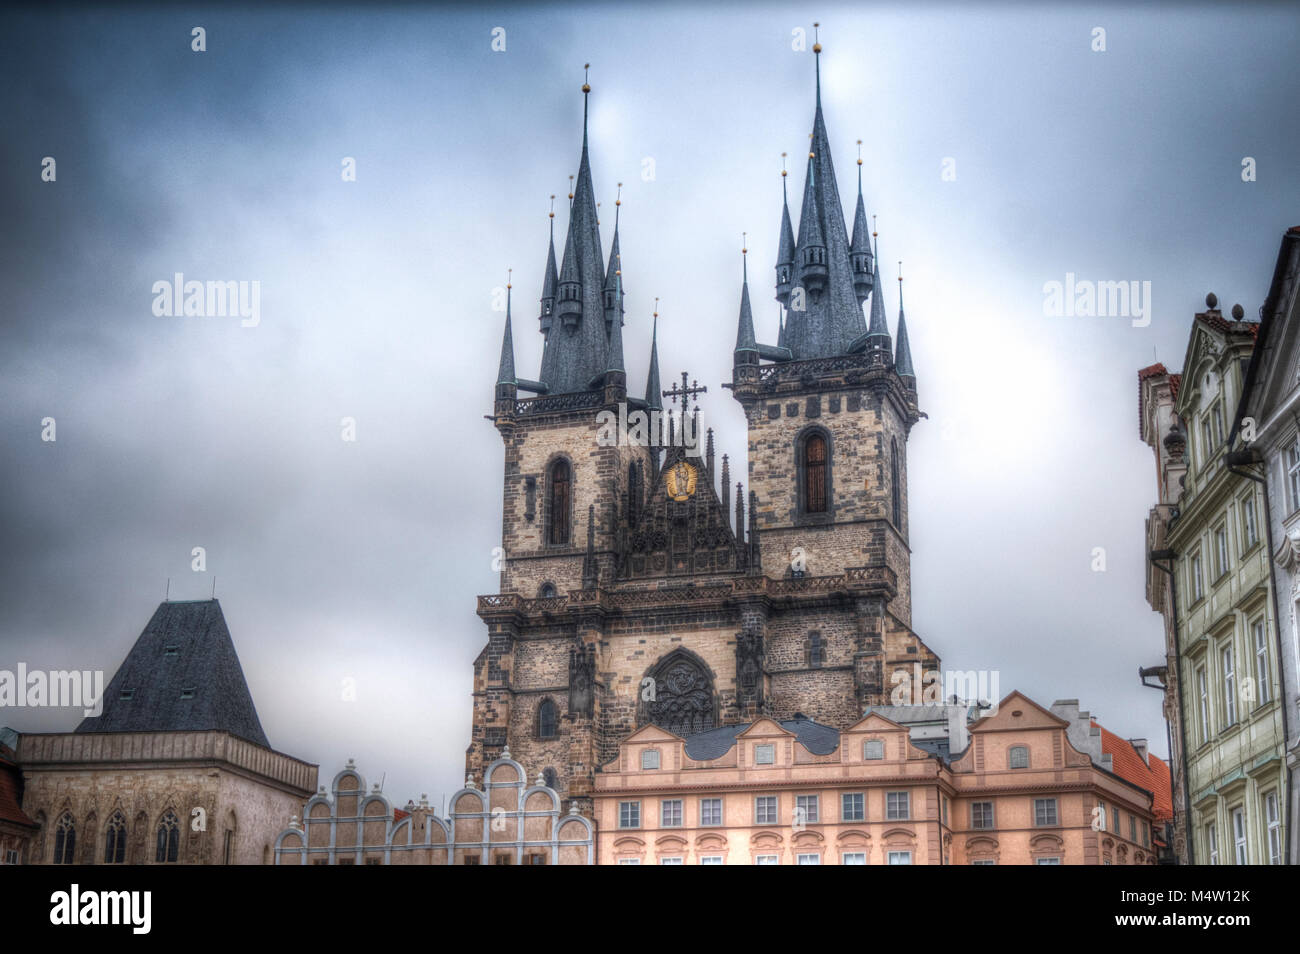 Prague Old town square, Tyn Cathedral. under sunlight. Stock Photo